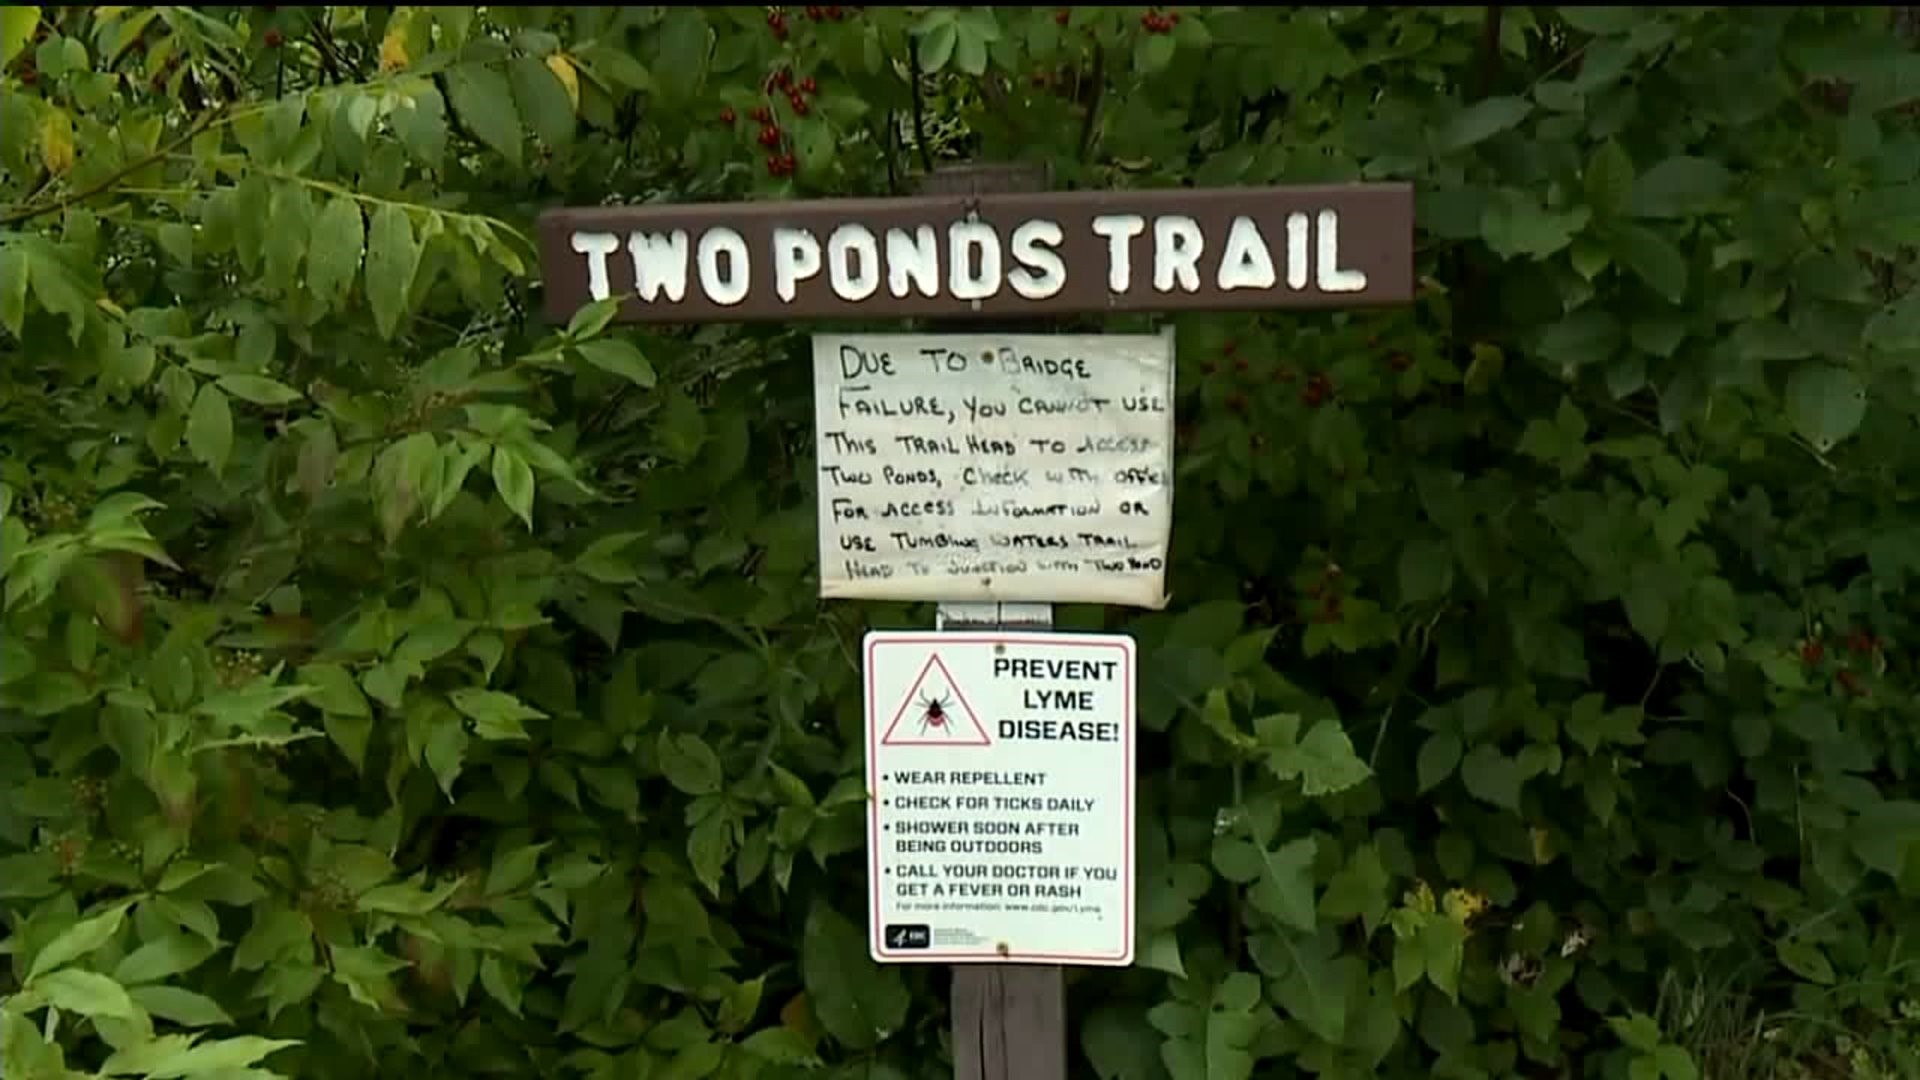 Hiking Trails Reopen in Parts of the Poconos